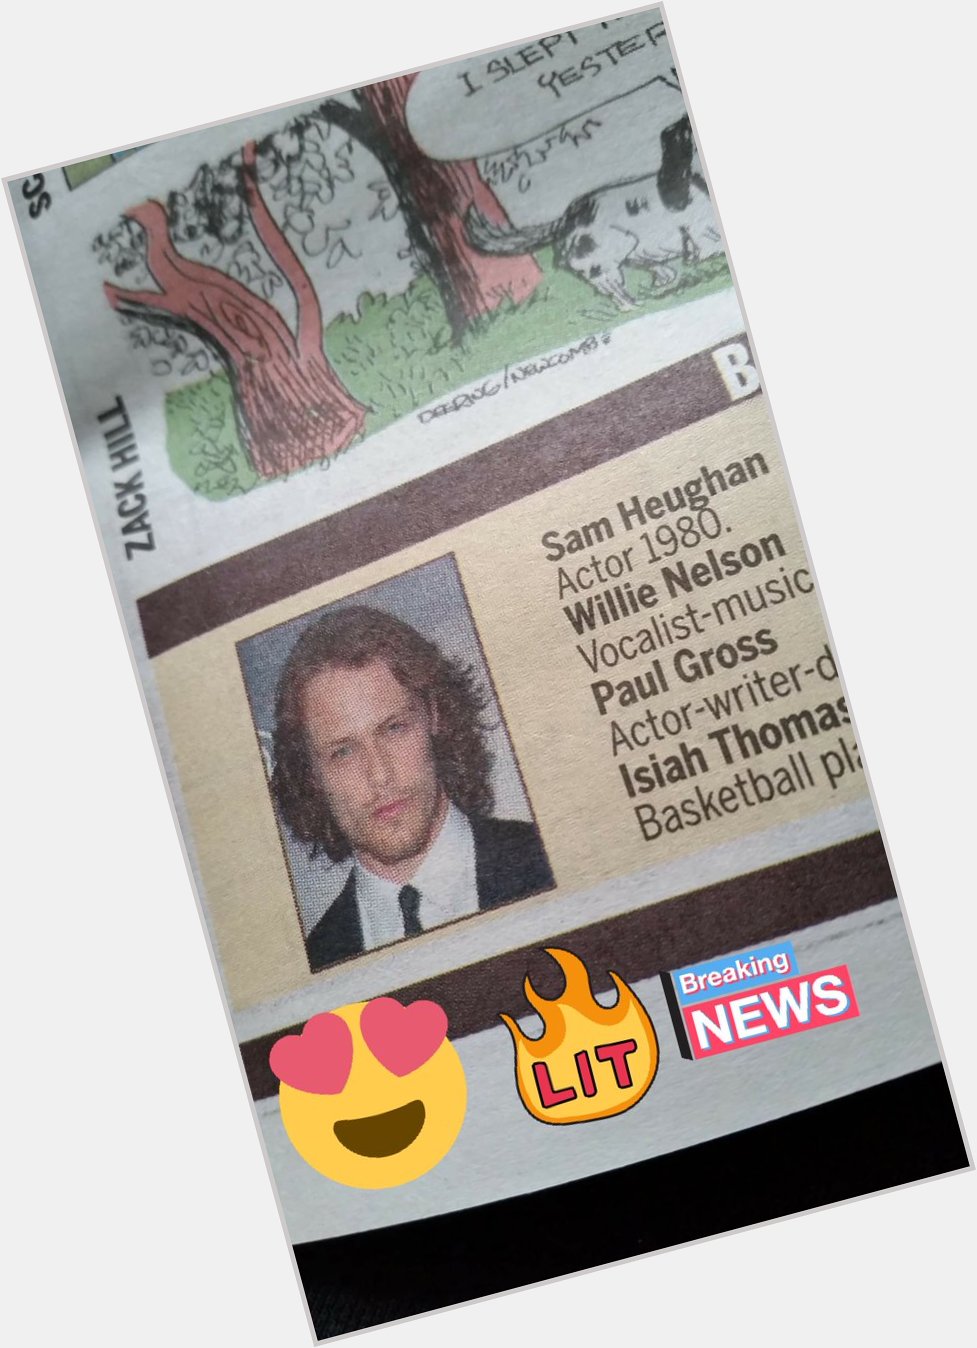 Look who\s birthday is in the Toronto newspaper today!!happy birthday Sam Heughan 